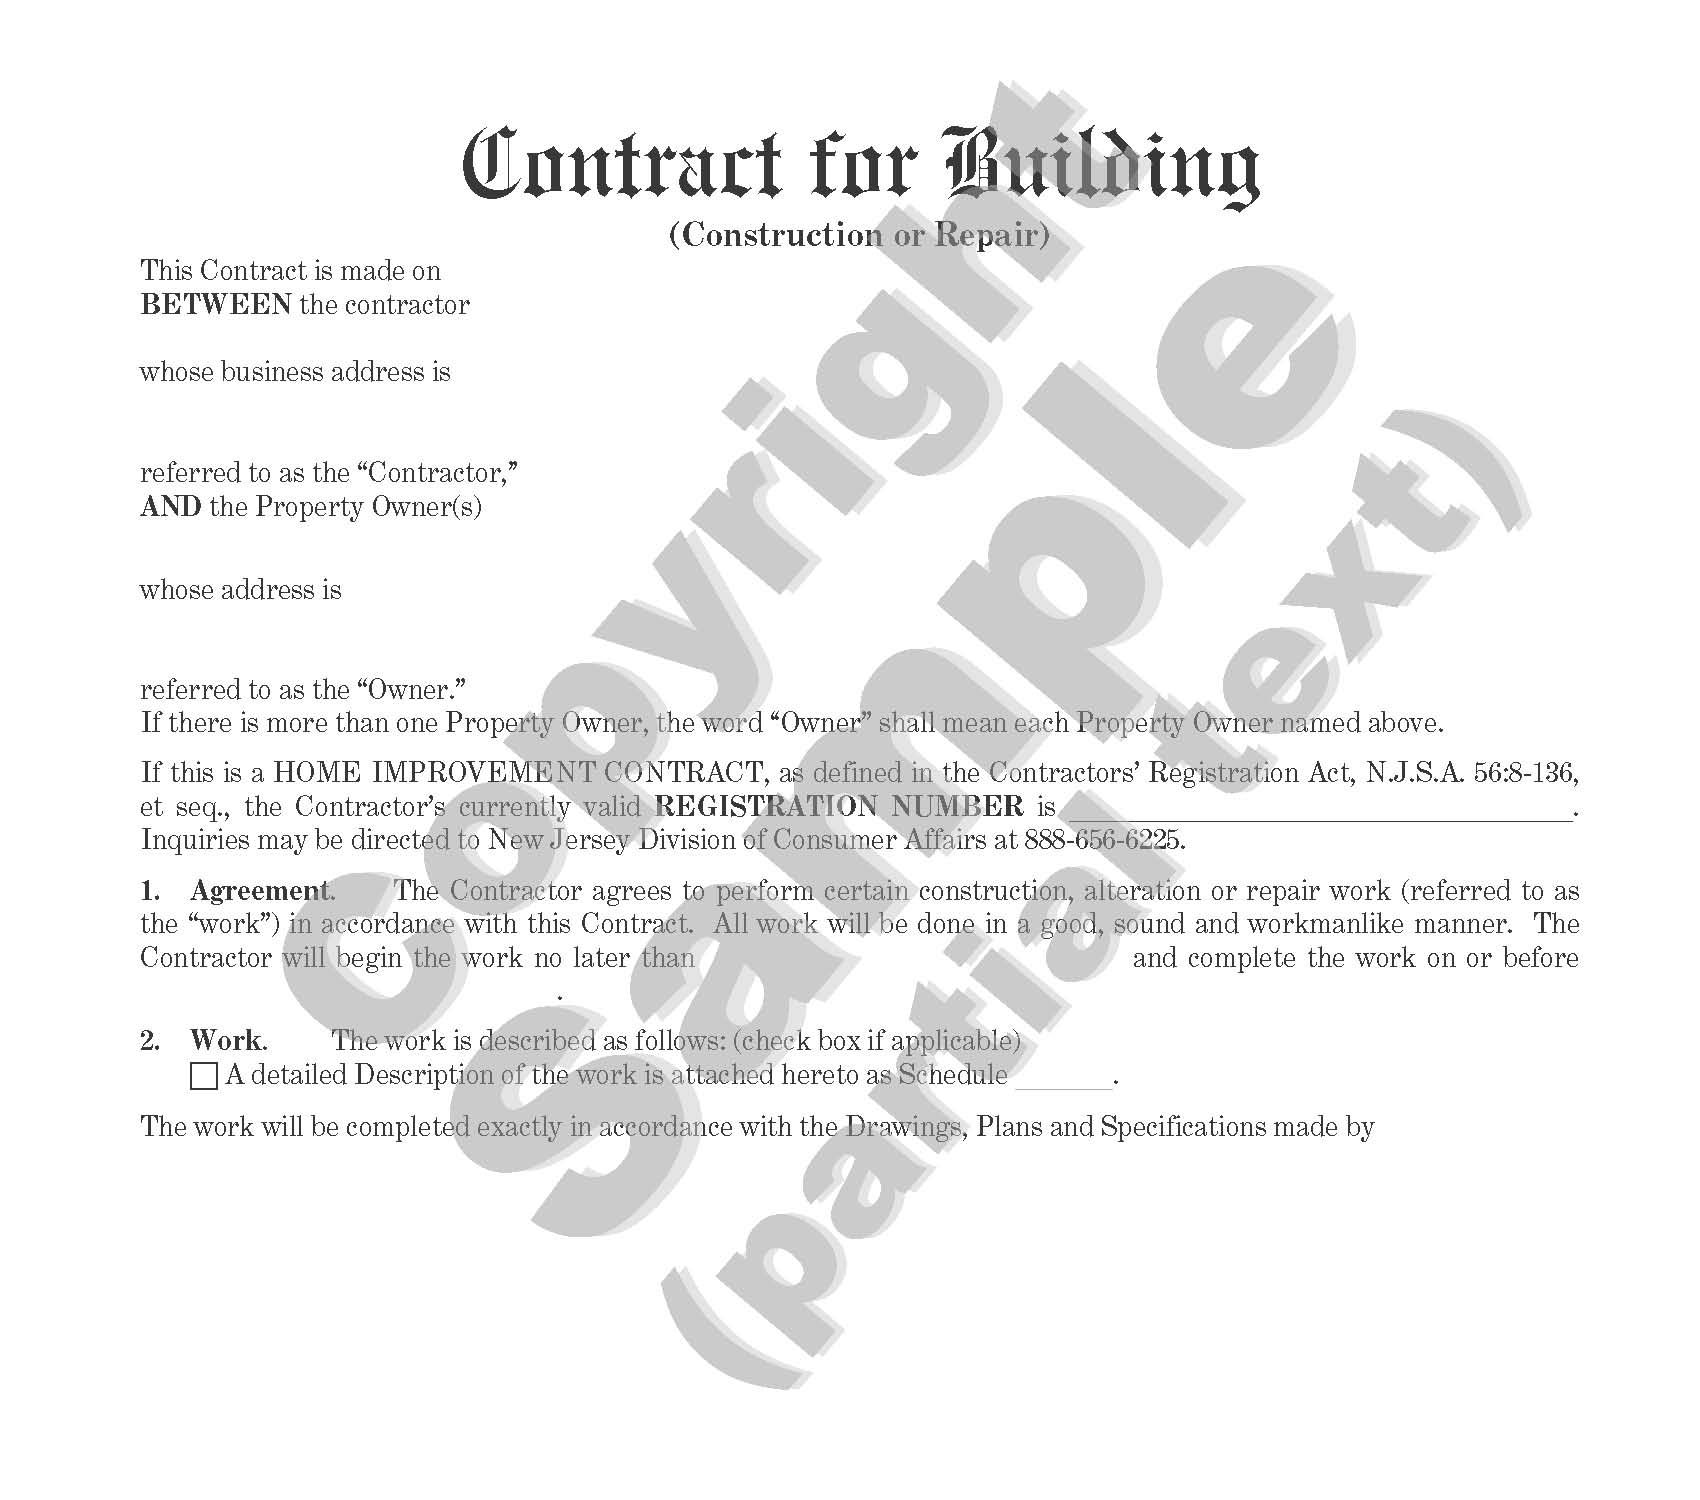 Contract for Building - Construction or Repair - Individual or Corporate